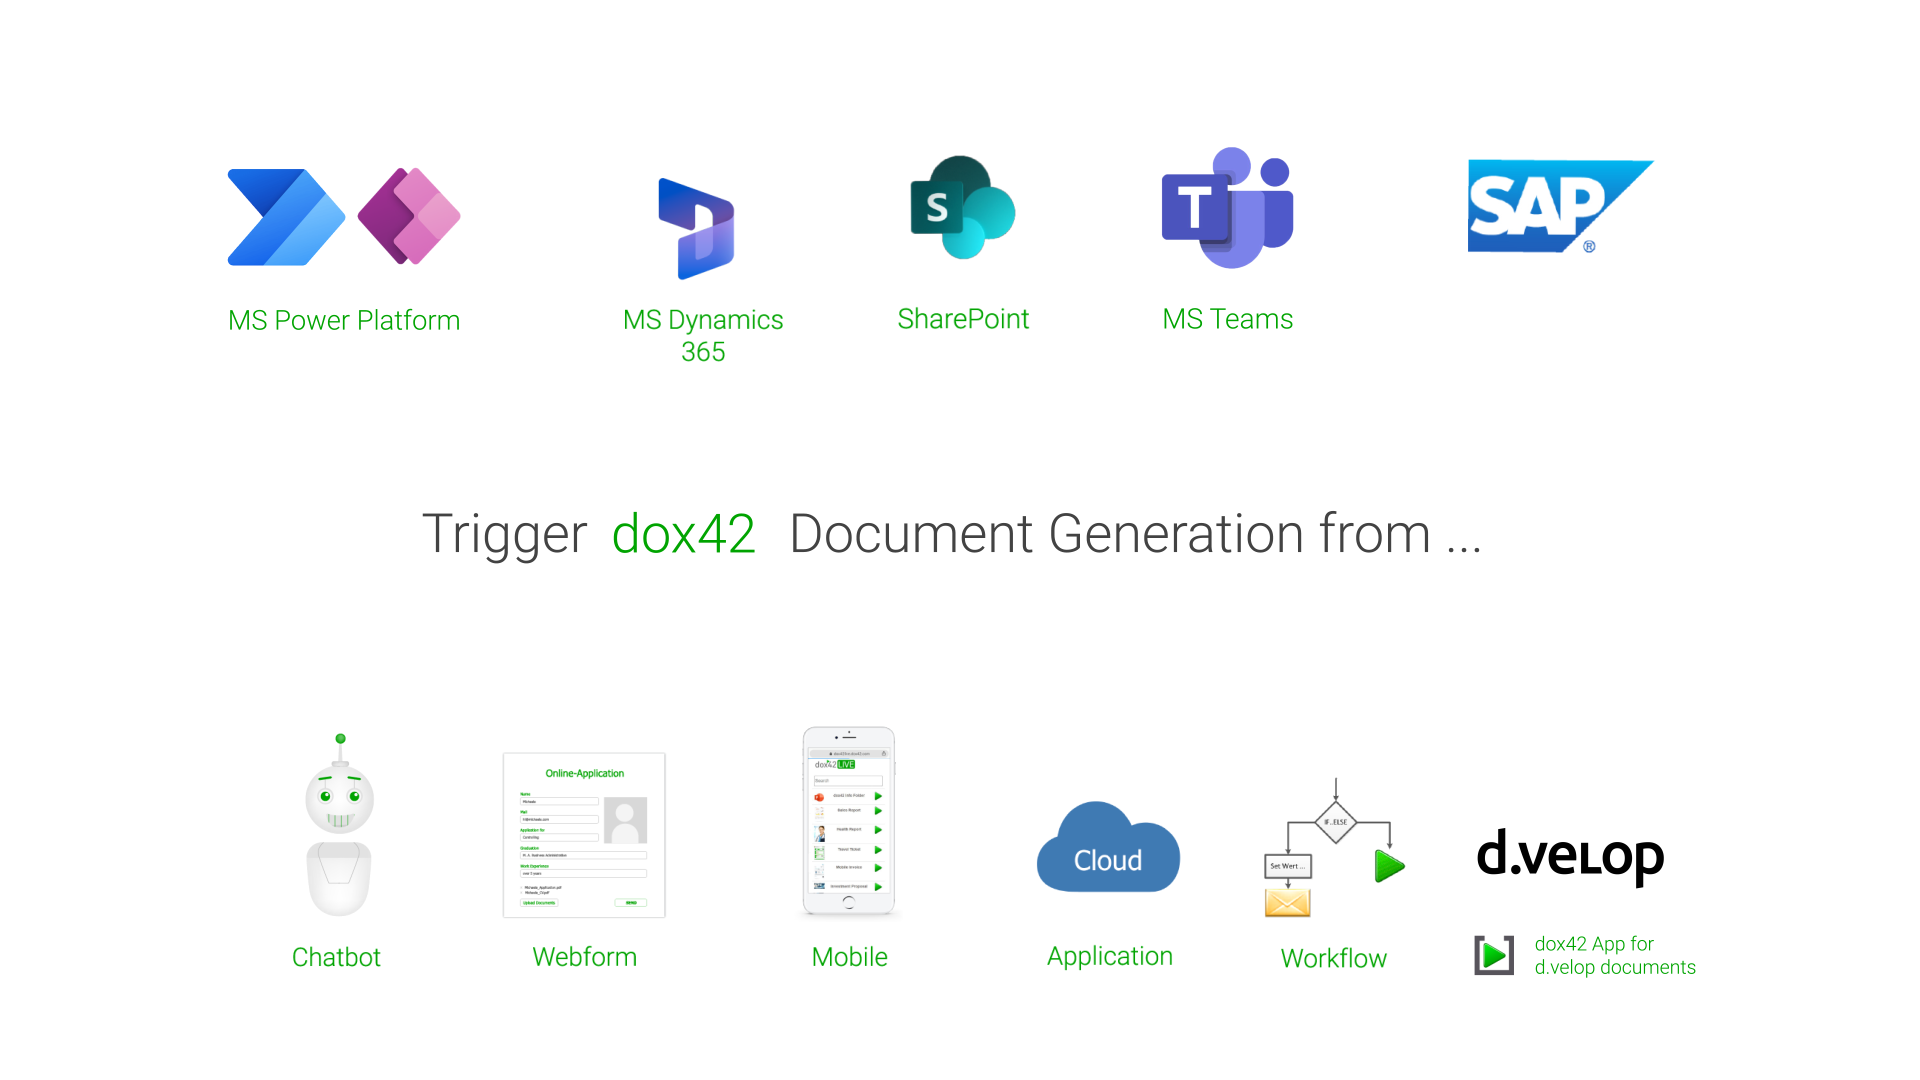 Generate documents by a click or workflow